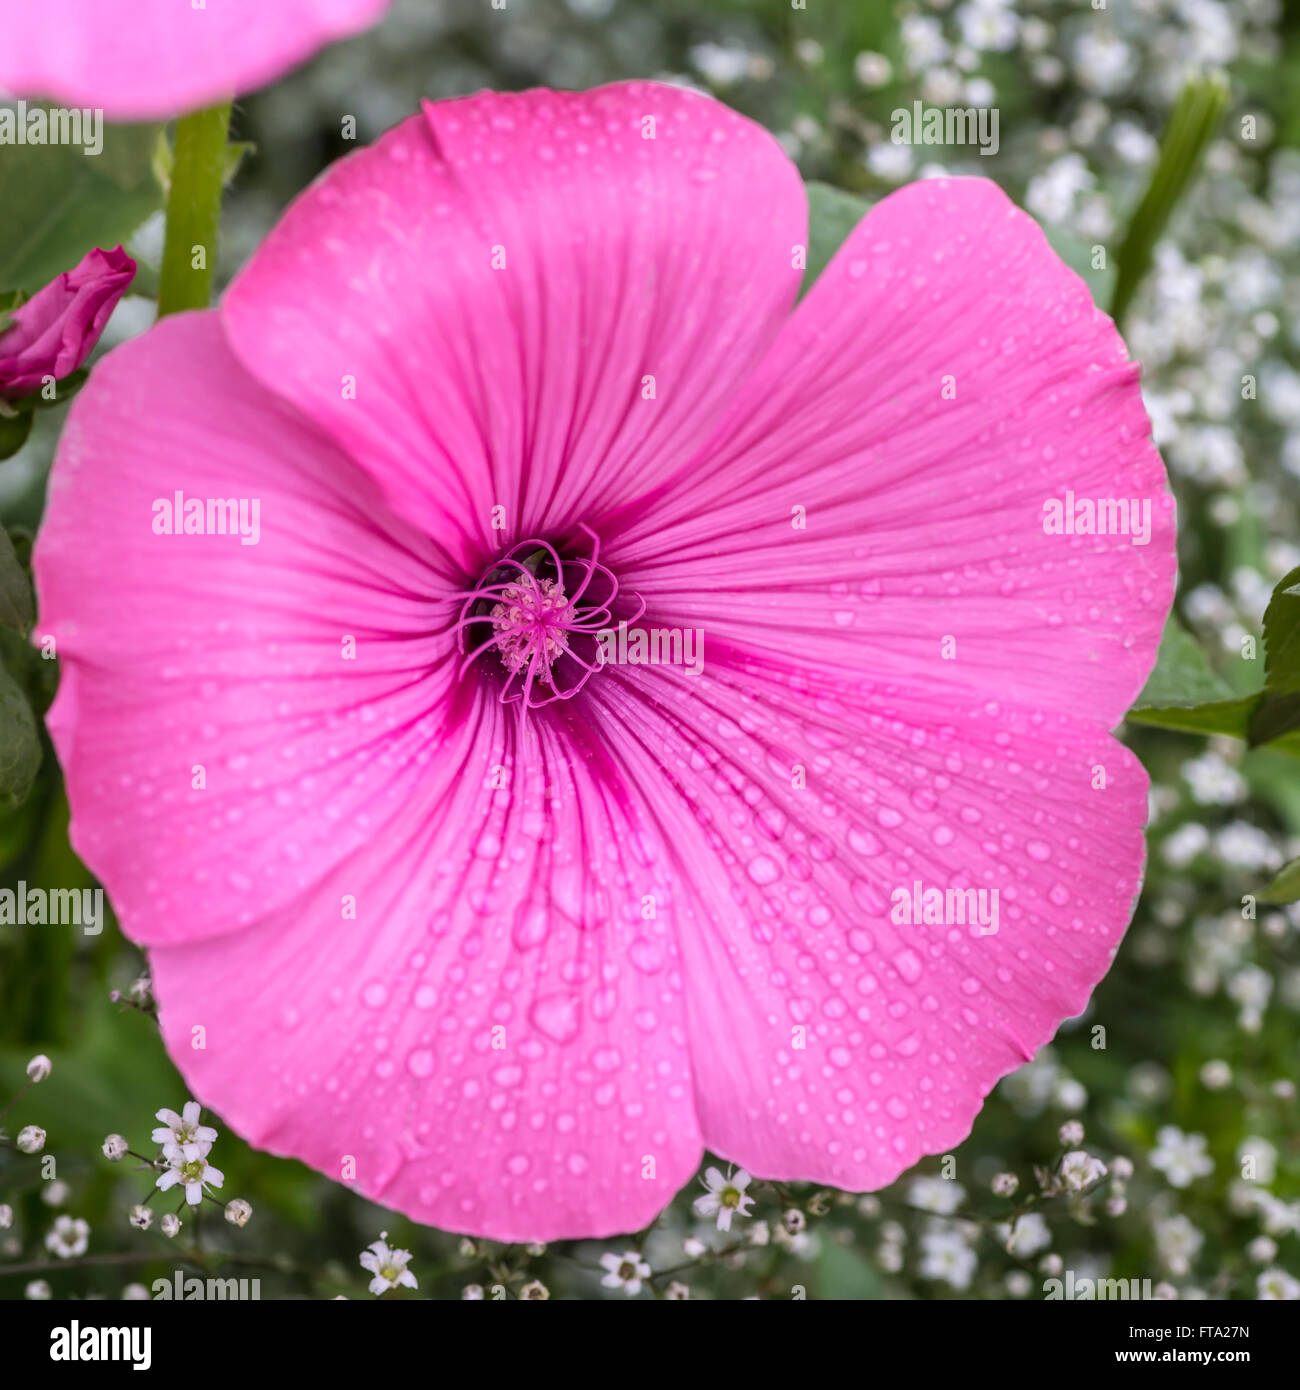 Lavetara or rose mallow with baby's breath in the summer garden. Stock Photo